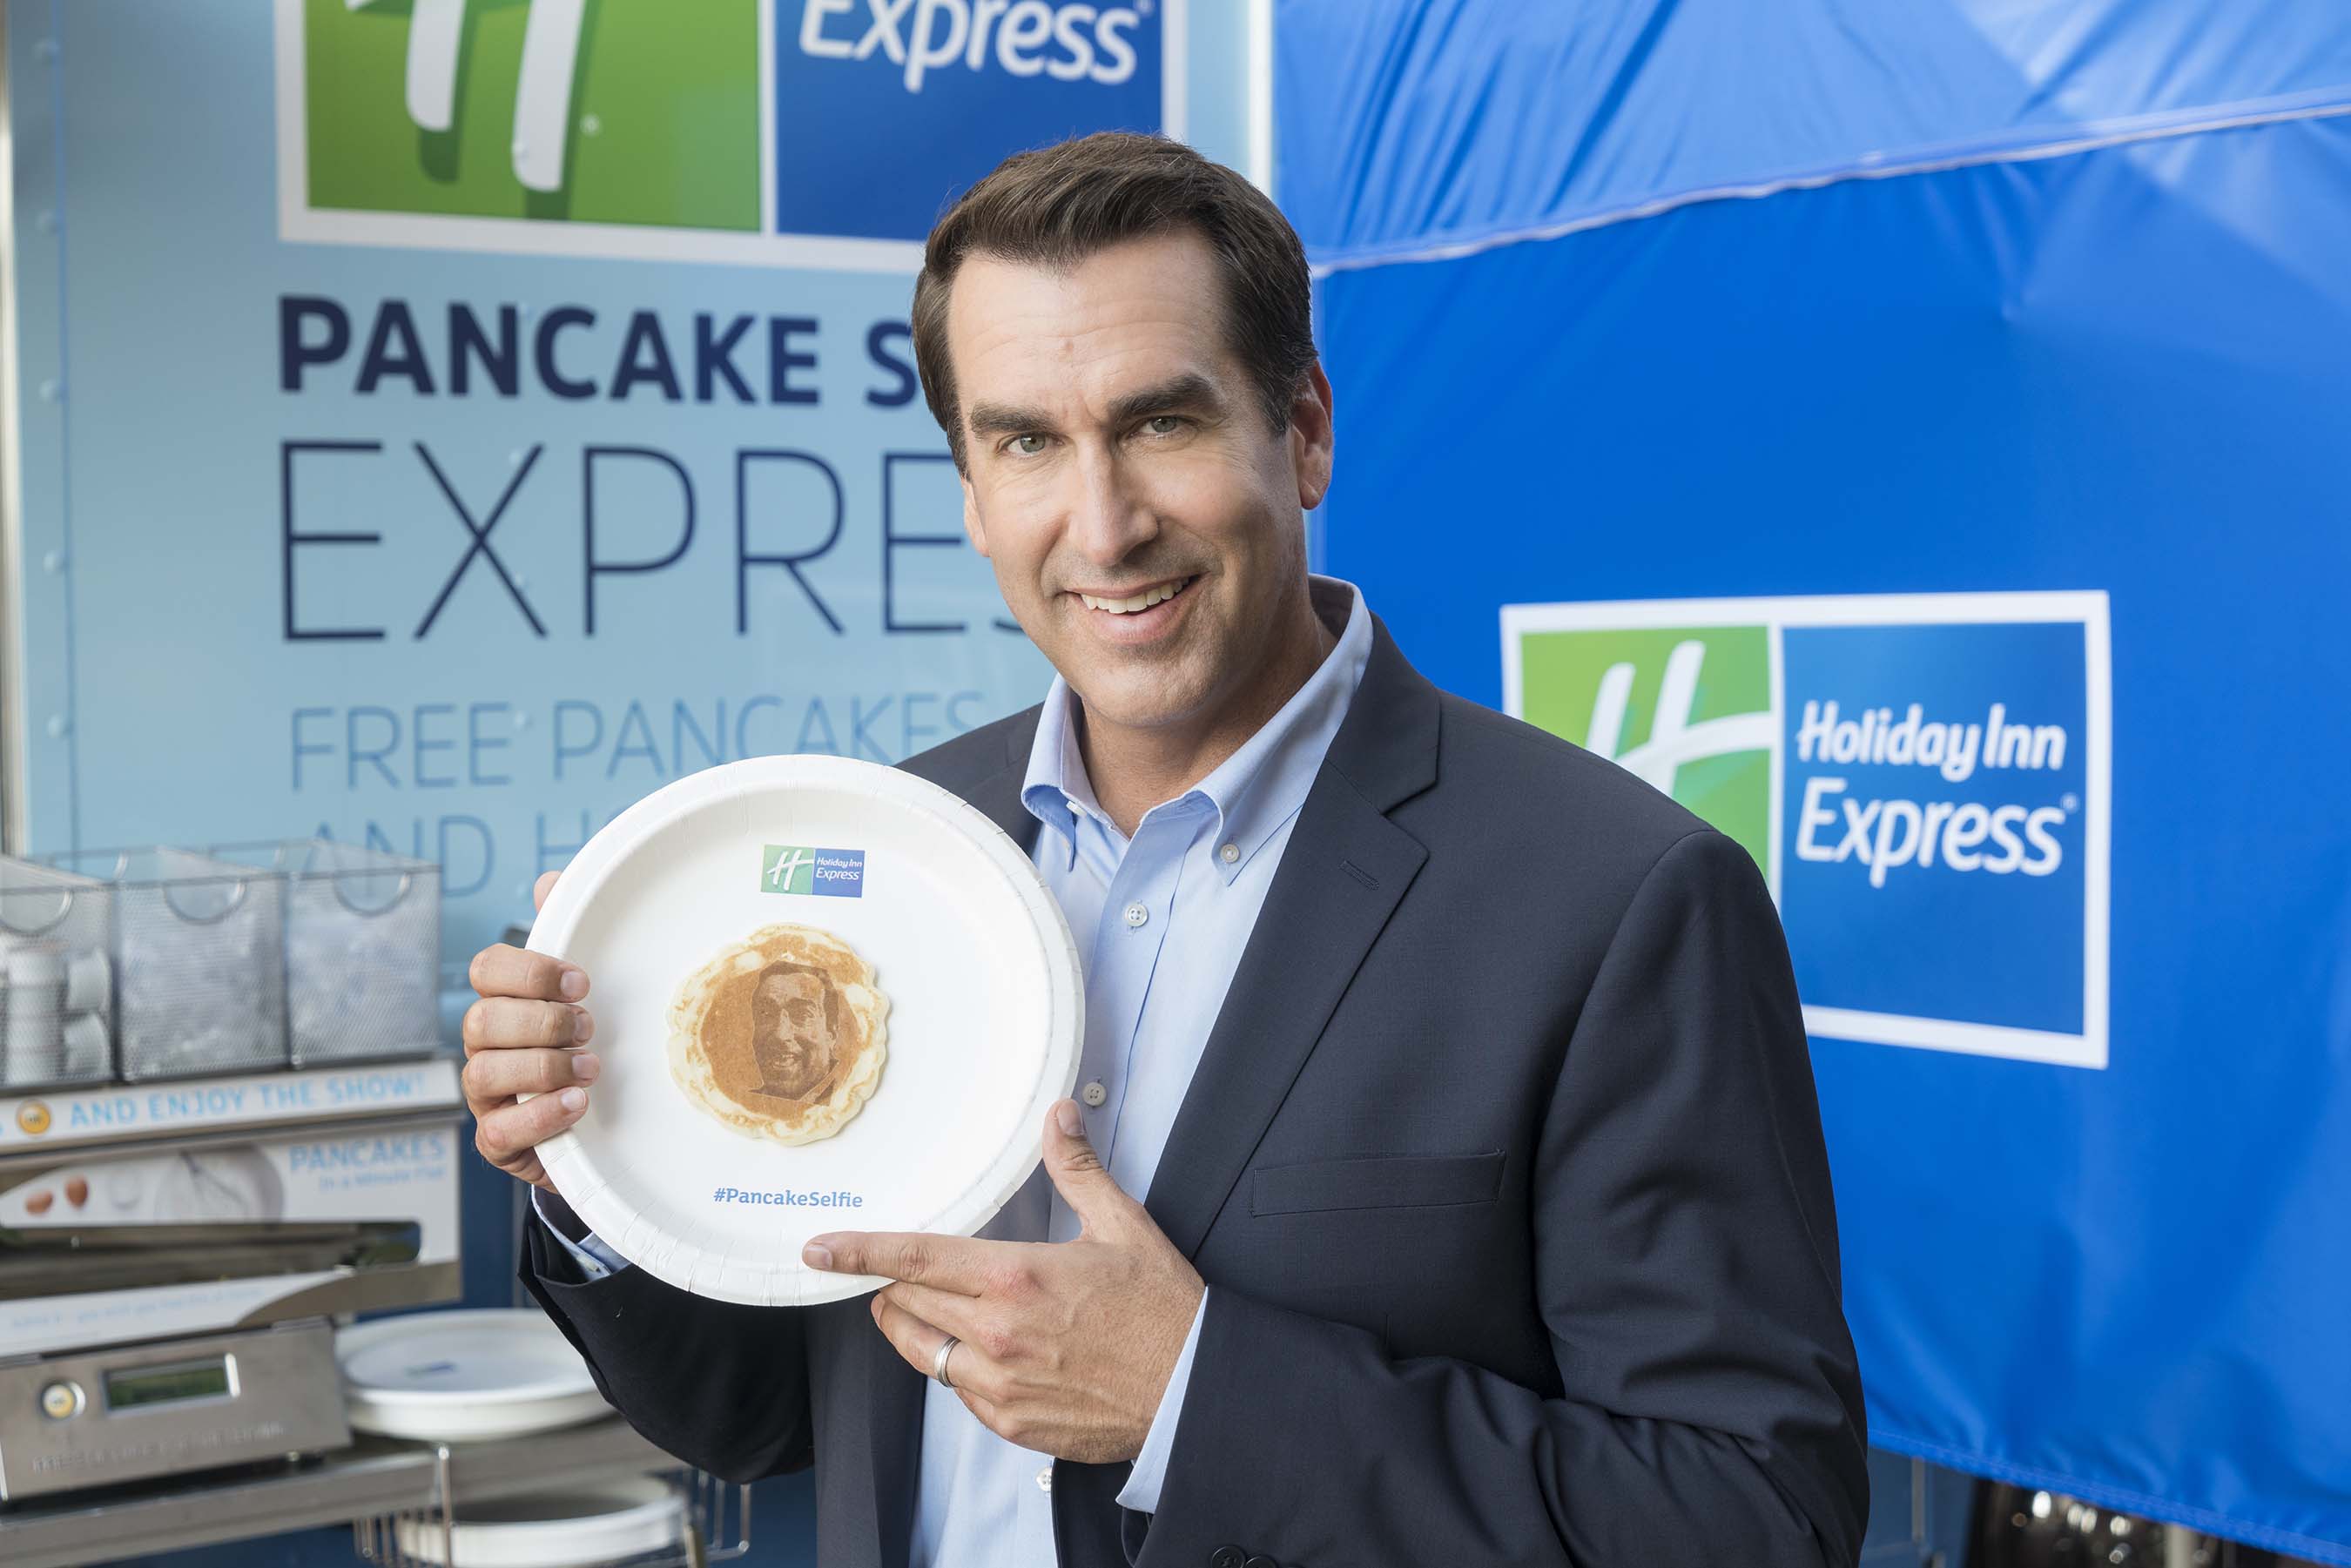 The Pancake Selfie Express is one of the simple, yet genius, ideas cooked up for Smart Travelers by the brand’s very hungry Creative Director, actor/comedian Rob Riggle.